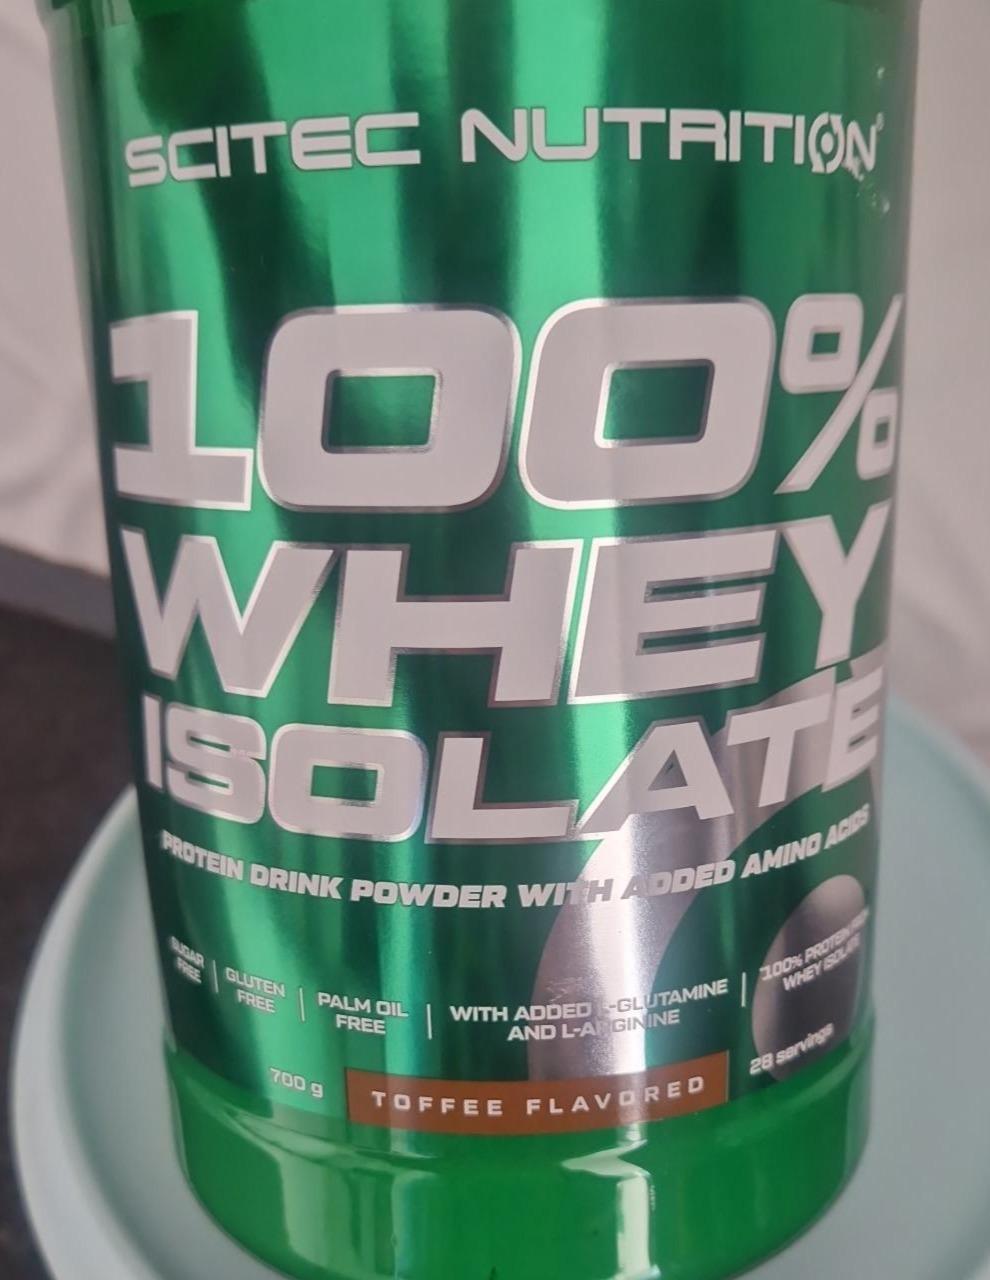 Fotografie - 100% Whey Isolate Toffee Flavored Scitec Nutrition